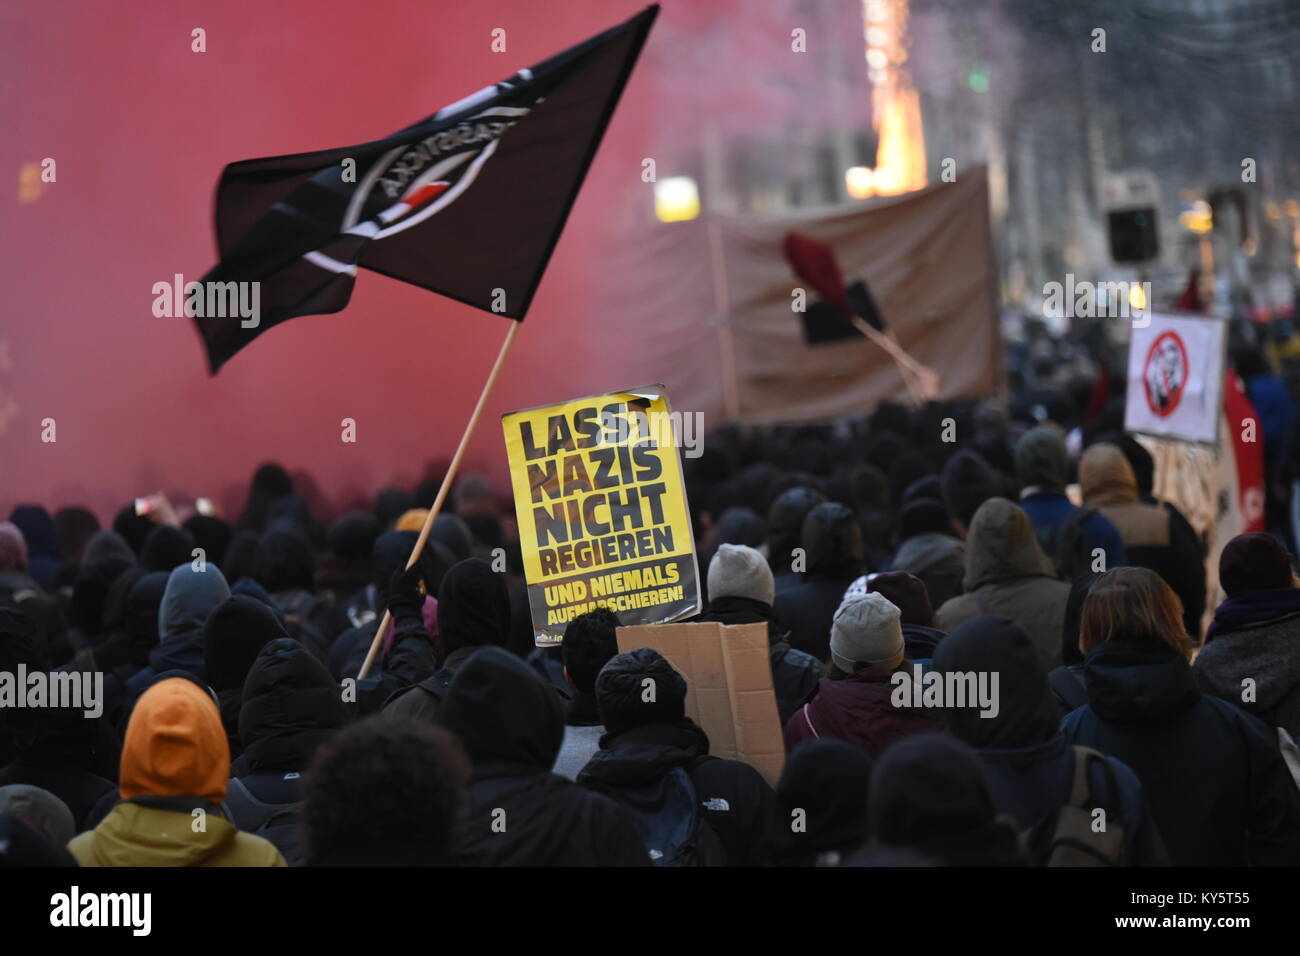 Vienna, Austria. 13th Jan, 2018. protesters waving flags and  carrying a sign during an anti-government demonstration. the sign reads 'don't let Nazis into government'. Credit: Vincent Sufiyan/Alamy Live News Stock Photo